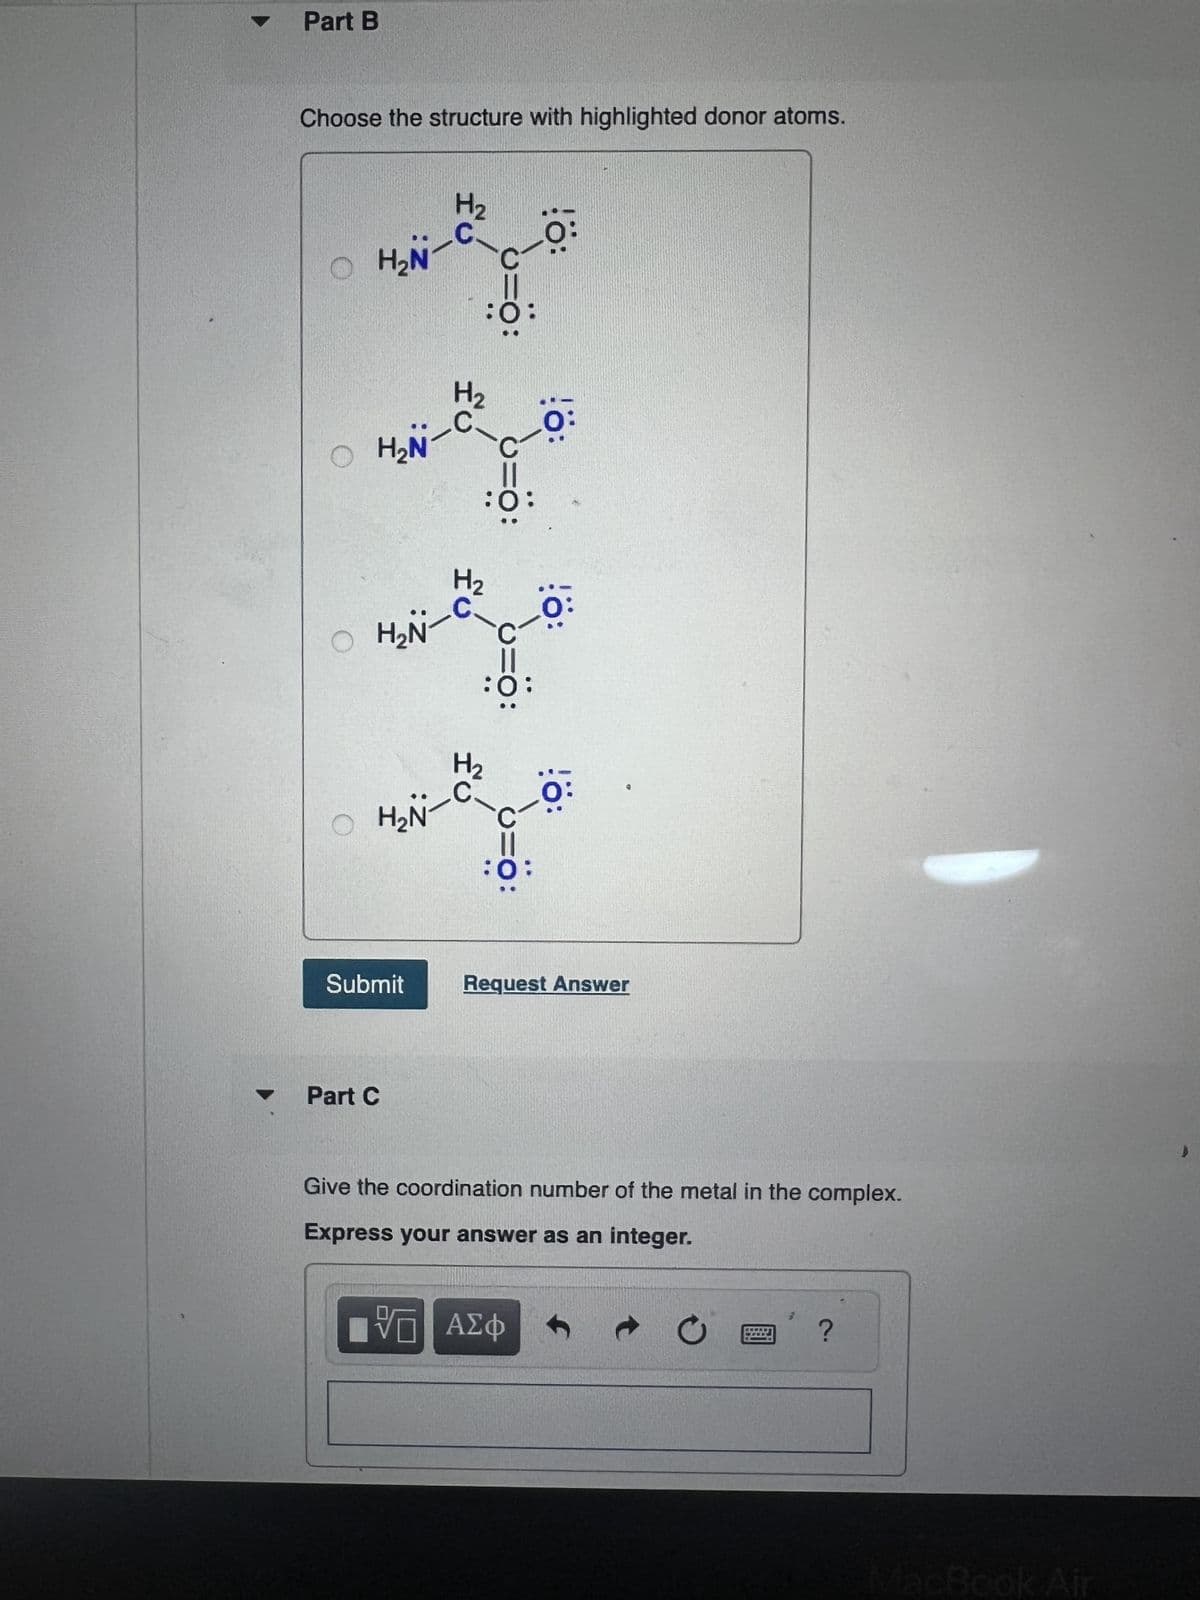 A
Part B
Choose the structure with highlighted donor atoms.
OH₂N
H2
=0:
:0:
O H₂NT
H₂N
H₂
H₂
0:
OH₂N
H₂
!ö:
!ö:
:0:
Submit
Request Answer
Part C
Give the coordination number of the metal in the complex.
Express your answer as an integer.
ΤΟ ΑΣΦ
->
0
i ?
MacBook Air